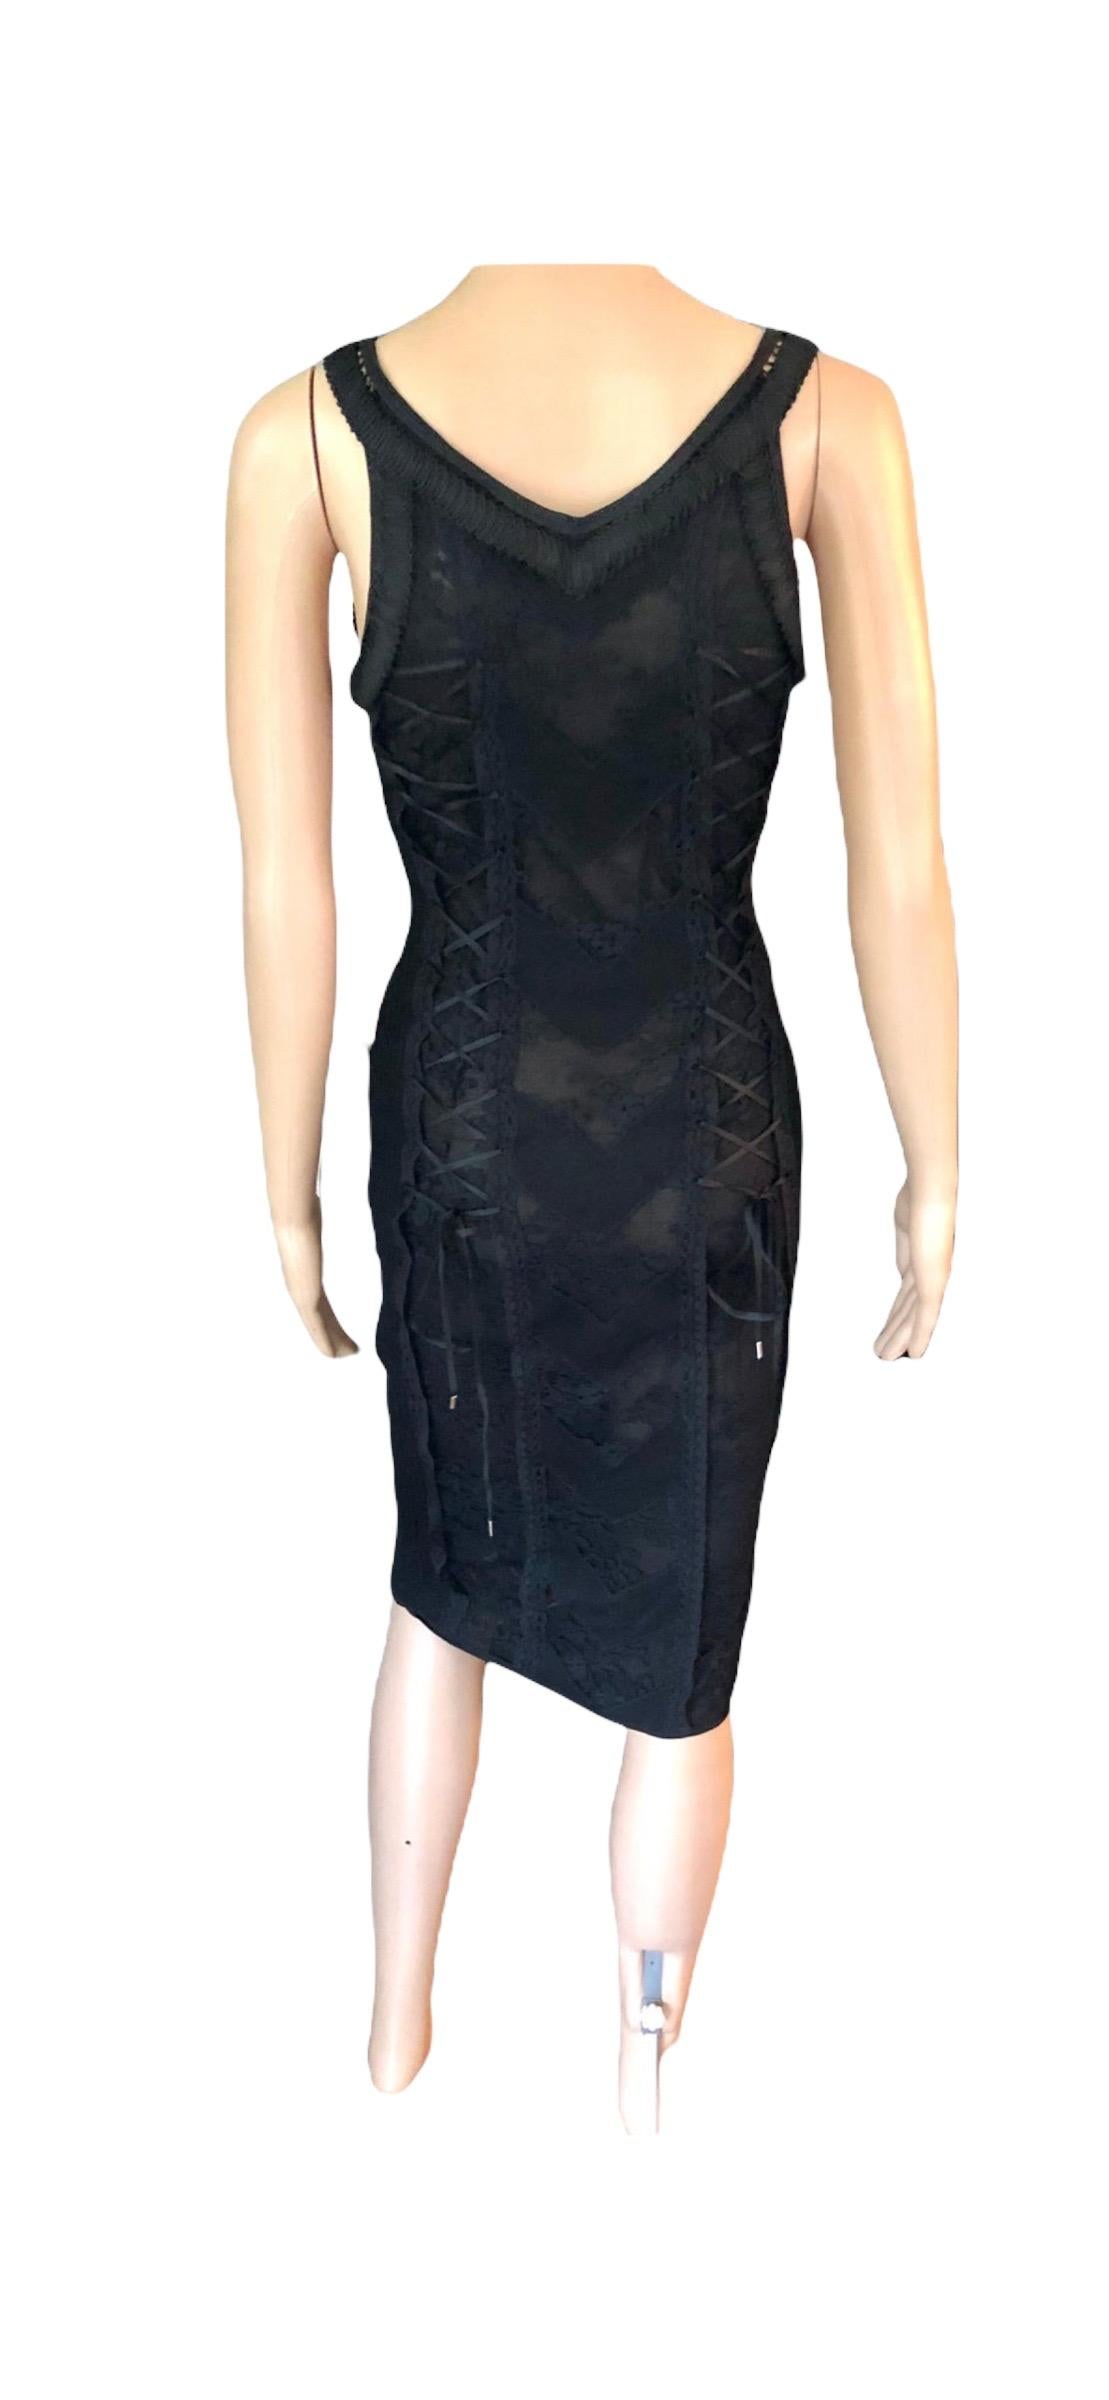 Christian Dior by John Galliano S/S 2006 Sheer Lace Trimmed Corset Knit Dress For Sale 9